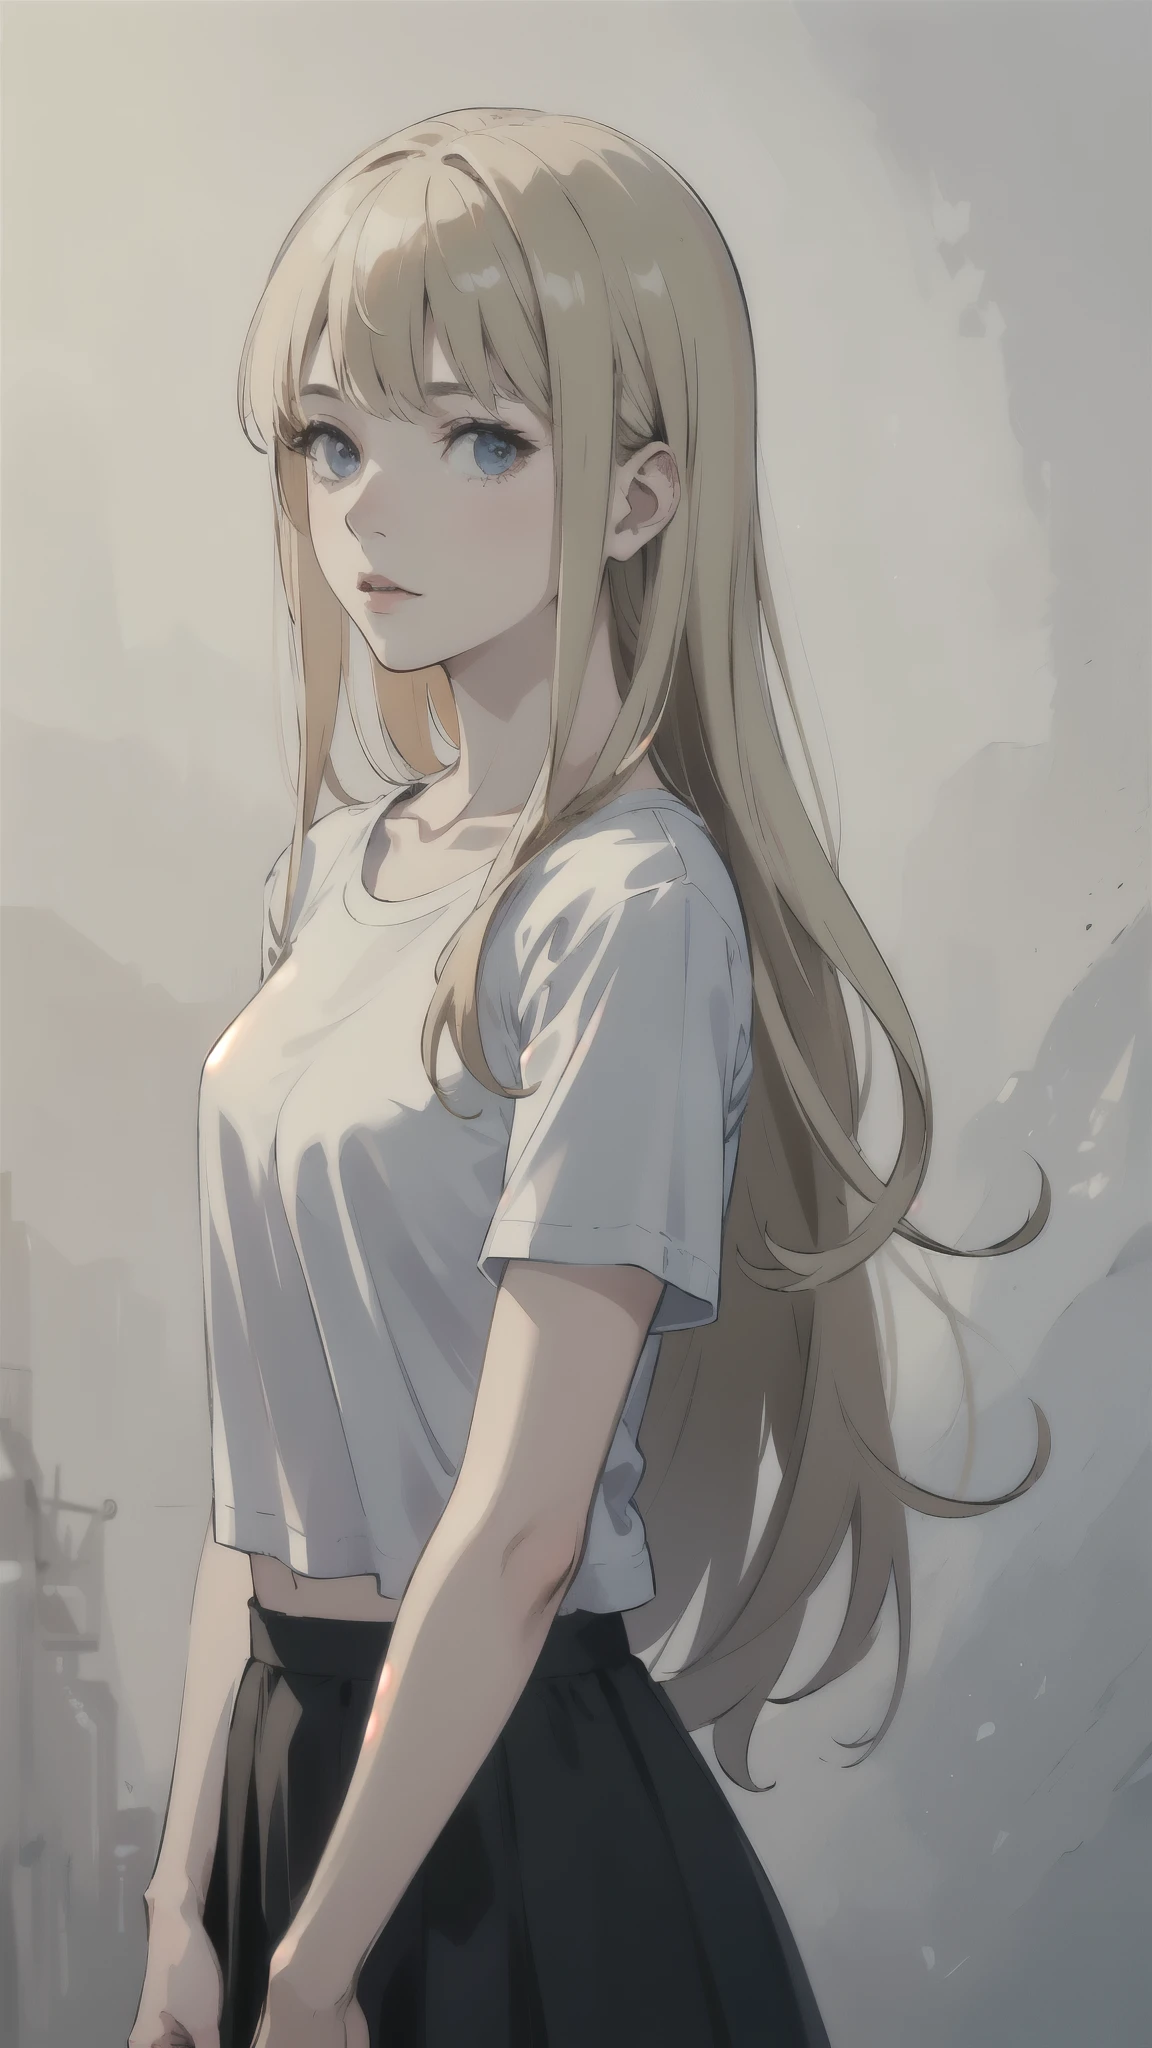 ((best quality)), ((masterpiece)), (detailed), one girl with long blond hair, standing neutral, portrait picture, whole body in image, white t-shirt, black skirt